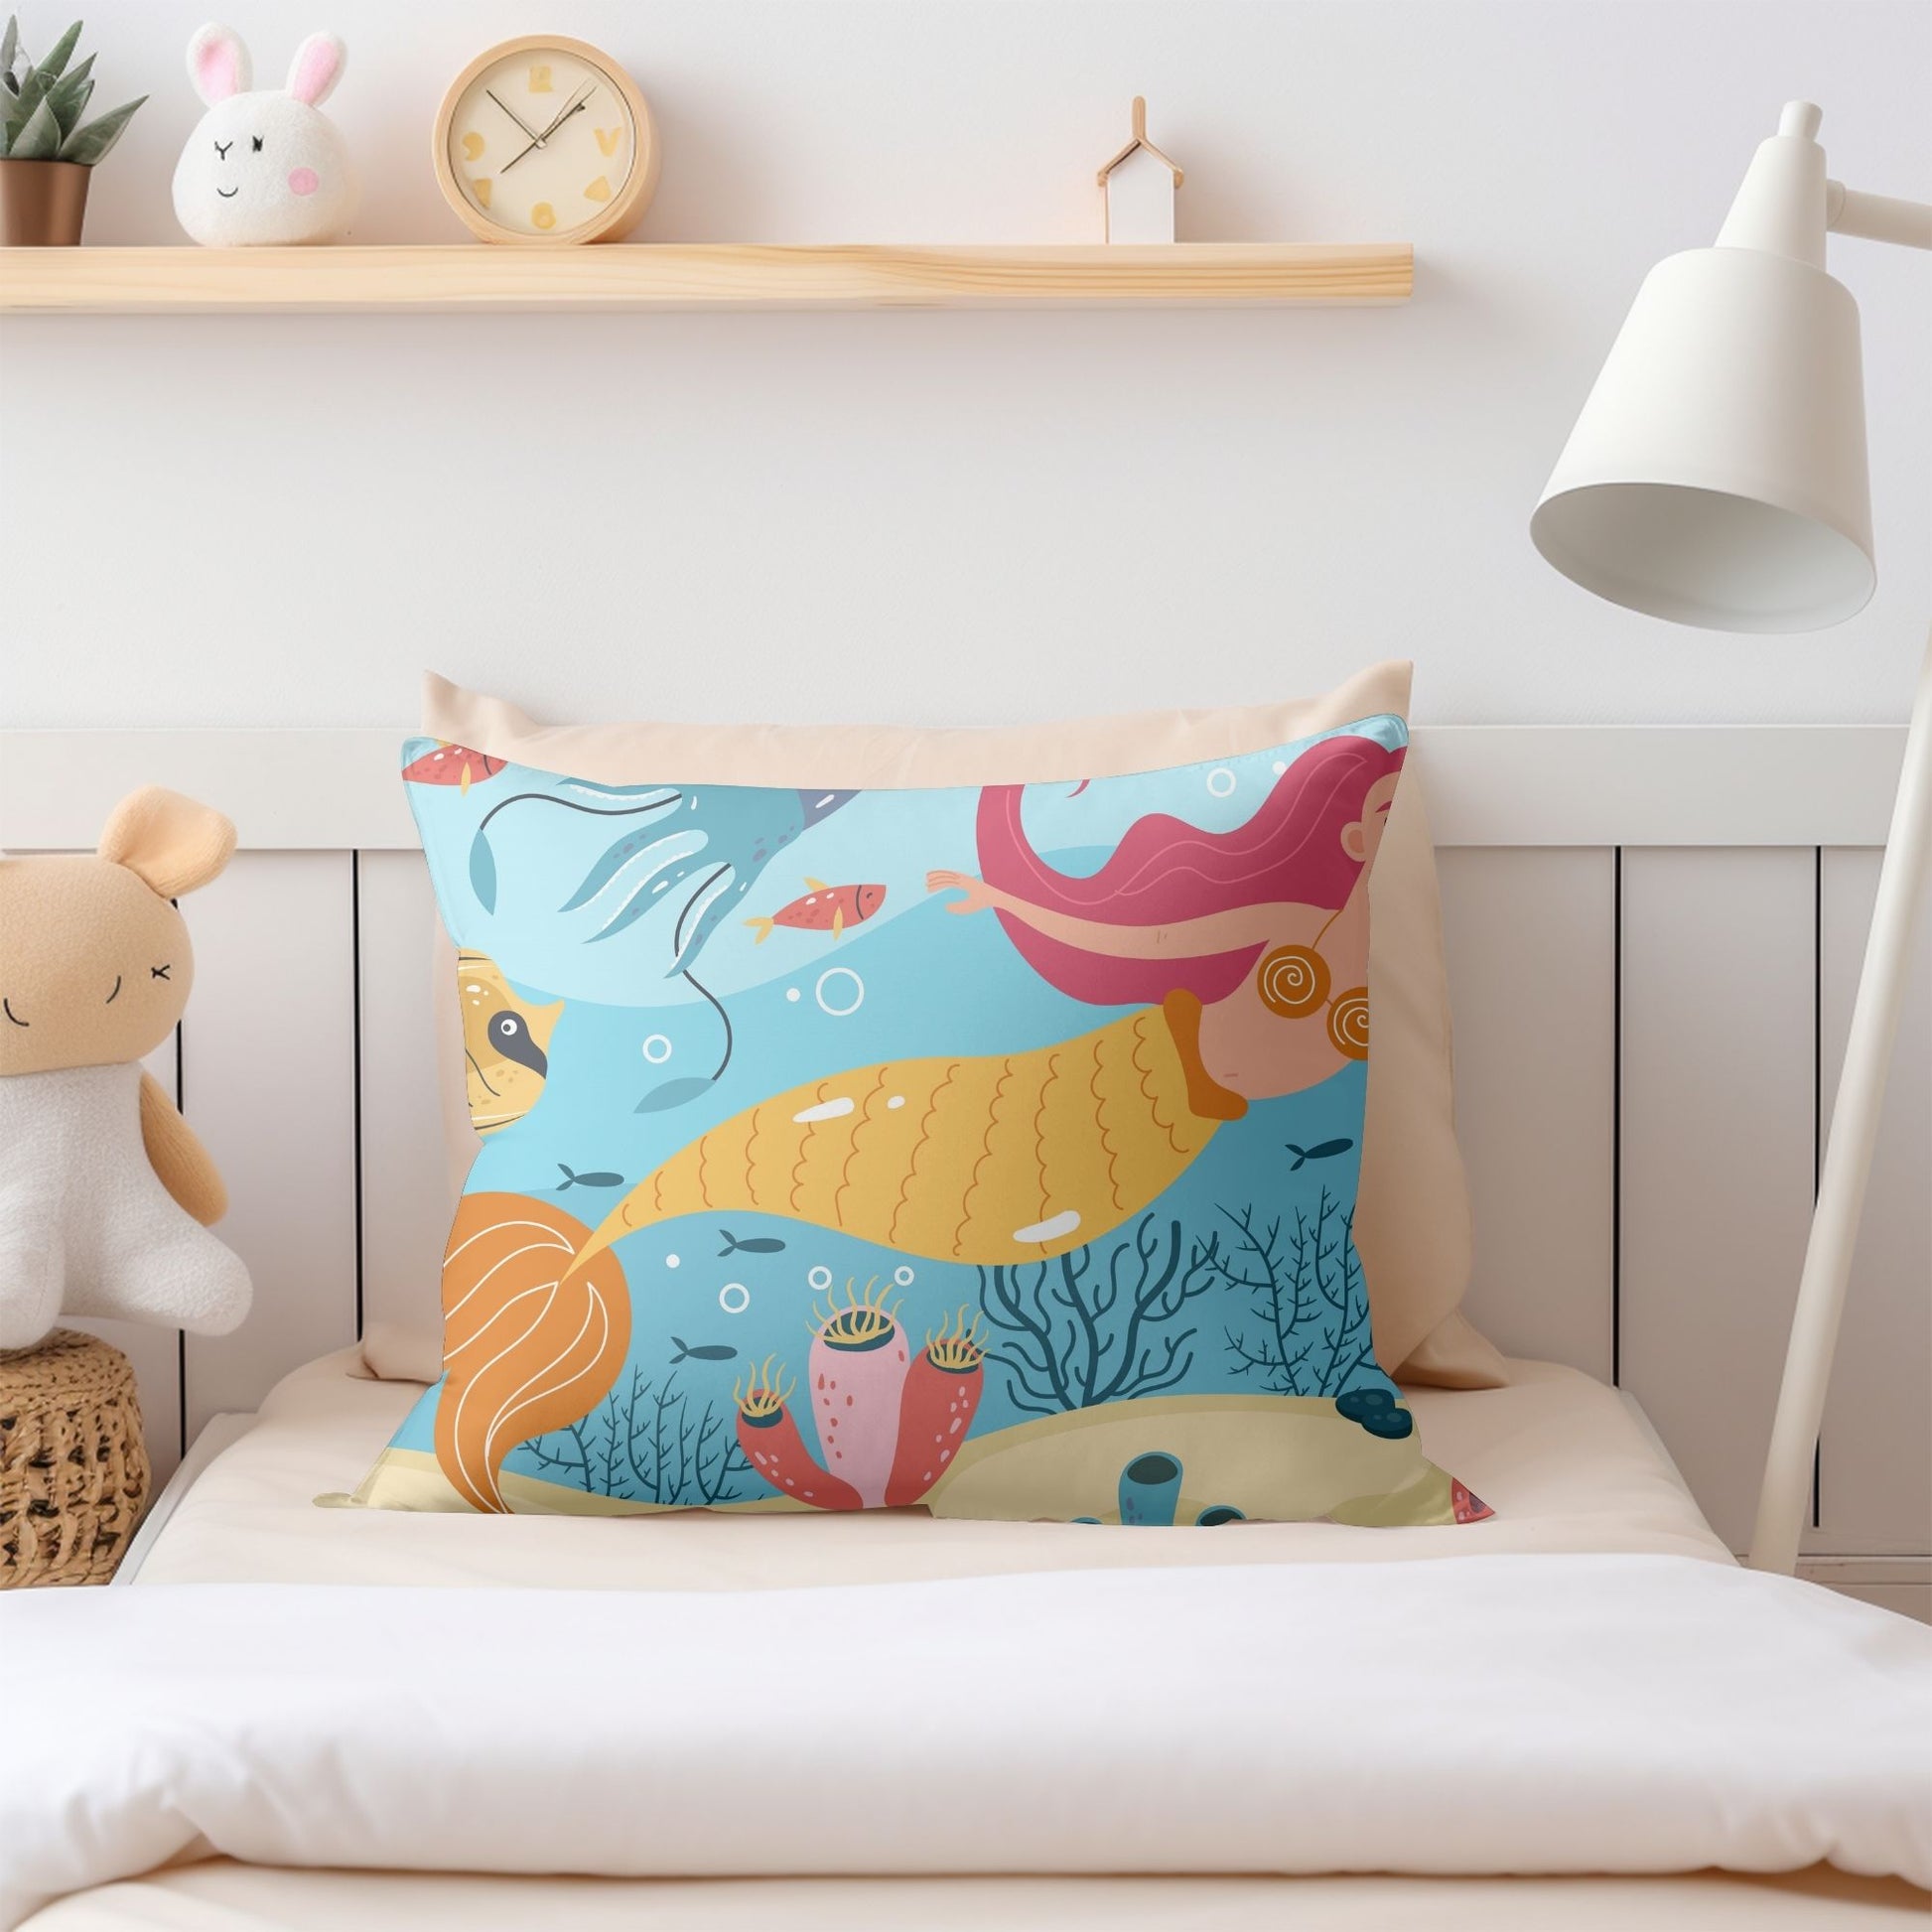 Dreamy mermaid baby pillow to add a touch of magic to the nursery.